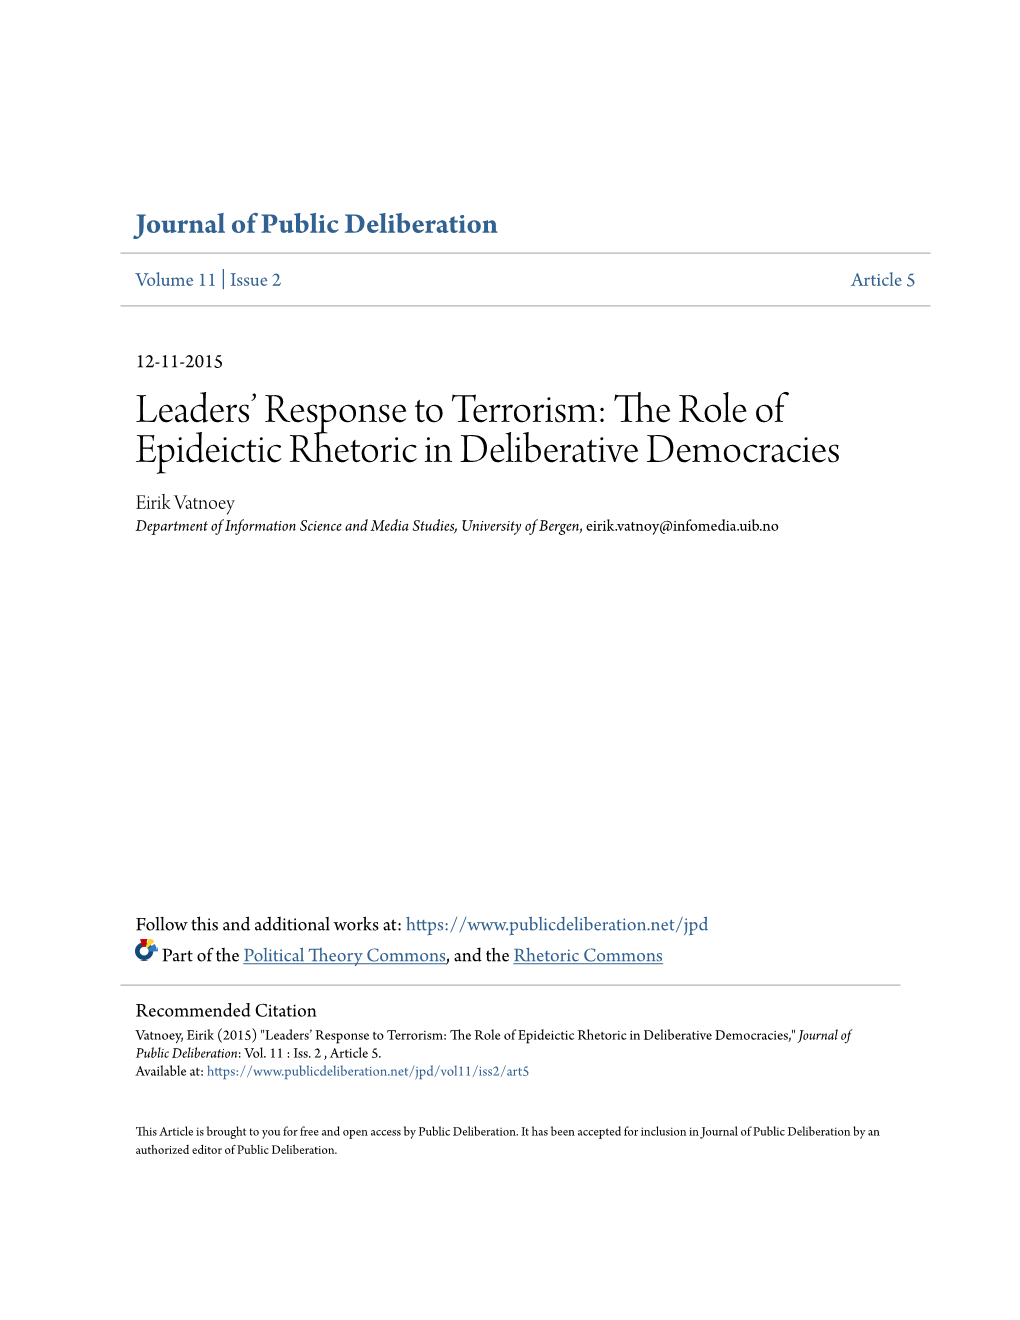 Leaders' Response to Terrorism: the Role of Epideictic Rhetoric In